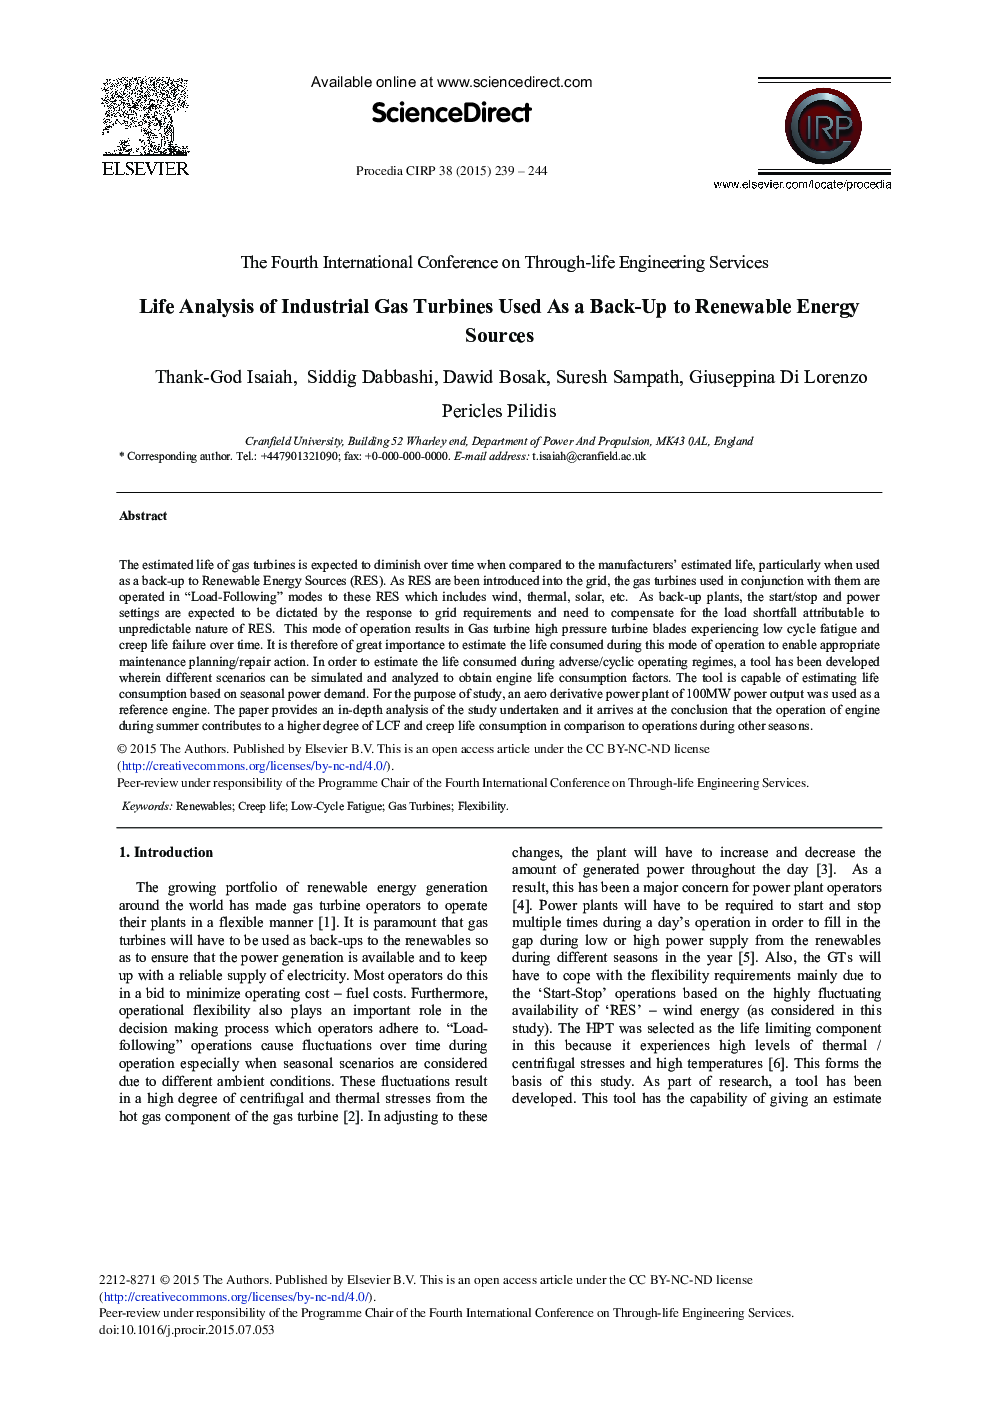 Life Analysis of Industrial Gas Turbines Used As a Back-Up to Renewable Energy Sources